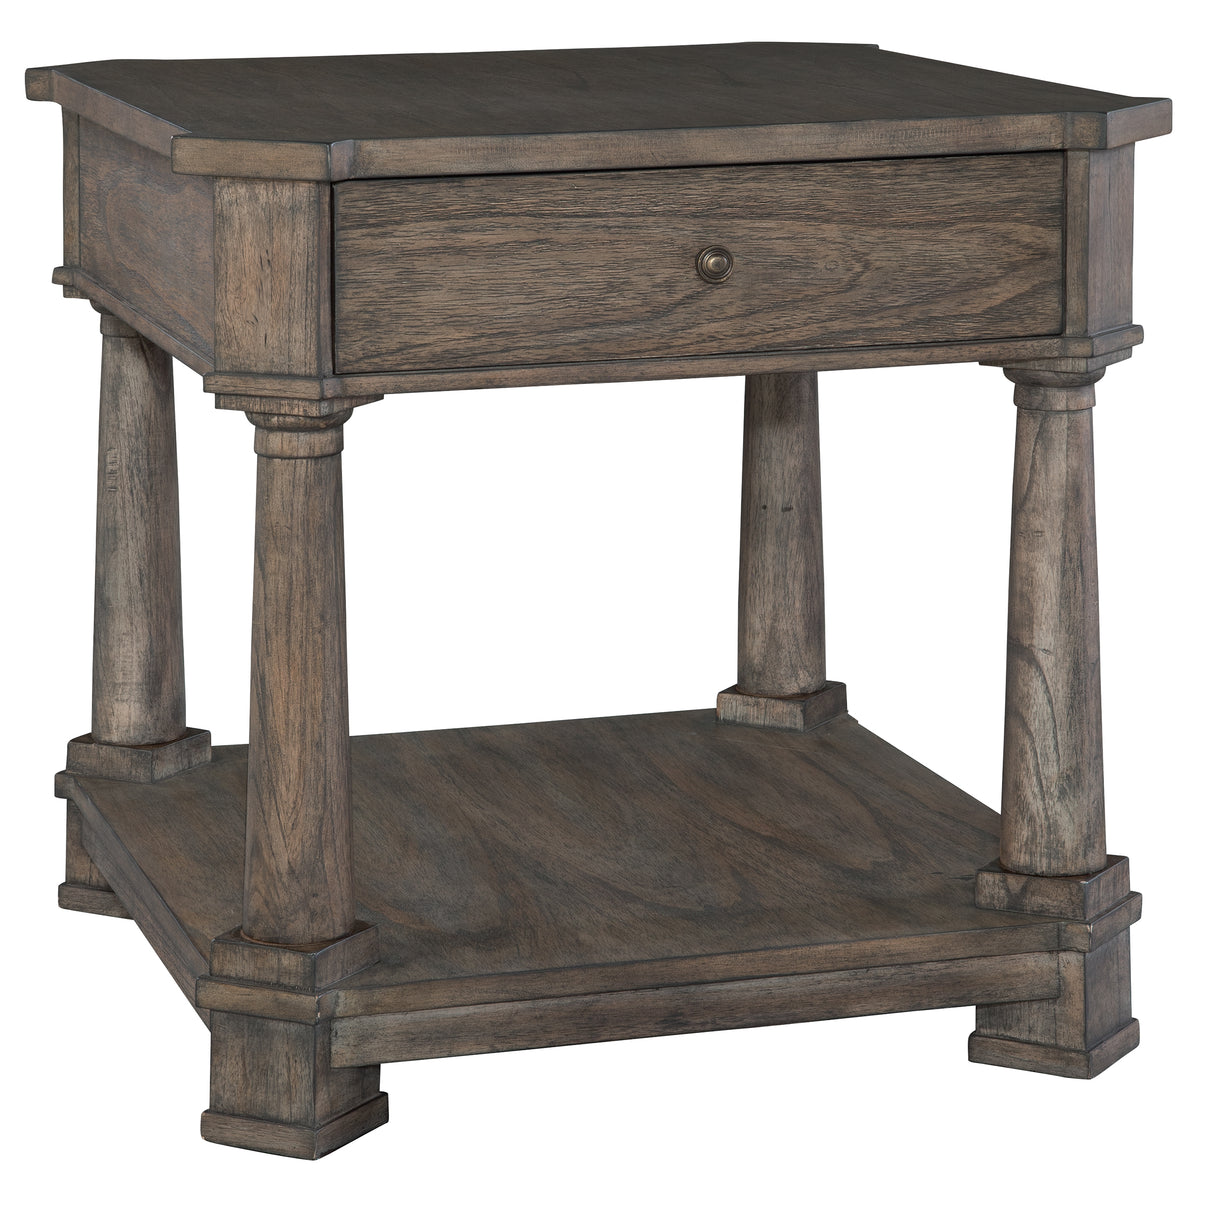 Hekman 23503 Lincoln Park 26in. x 28in. x 26.25in. End Table